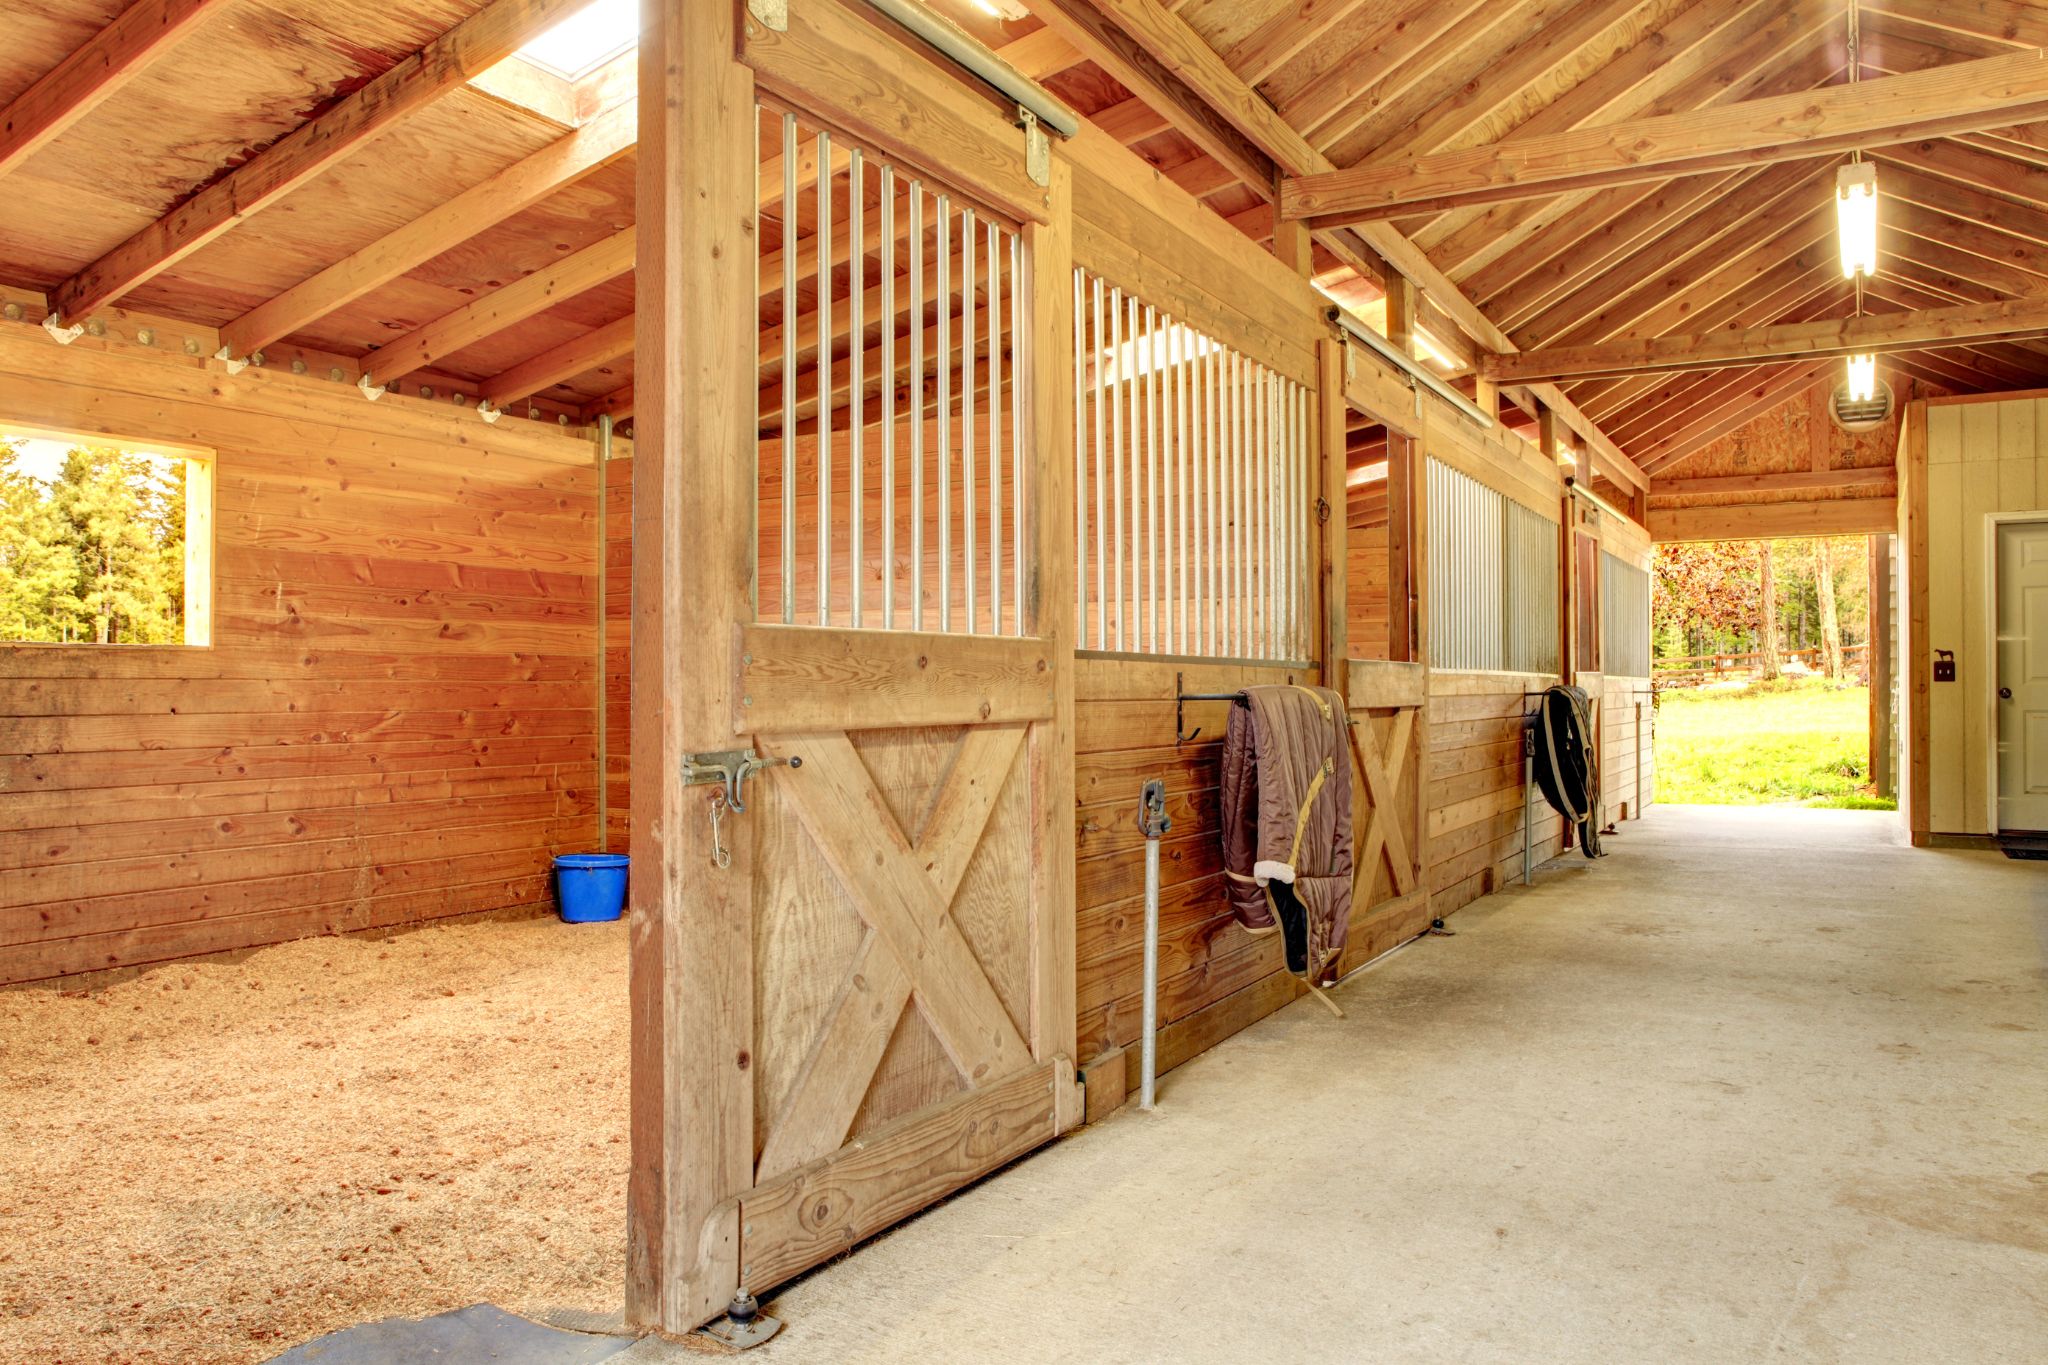 Find Rustic Barn spaces for rent in Miami, FL